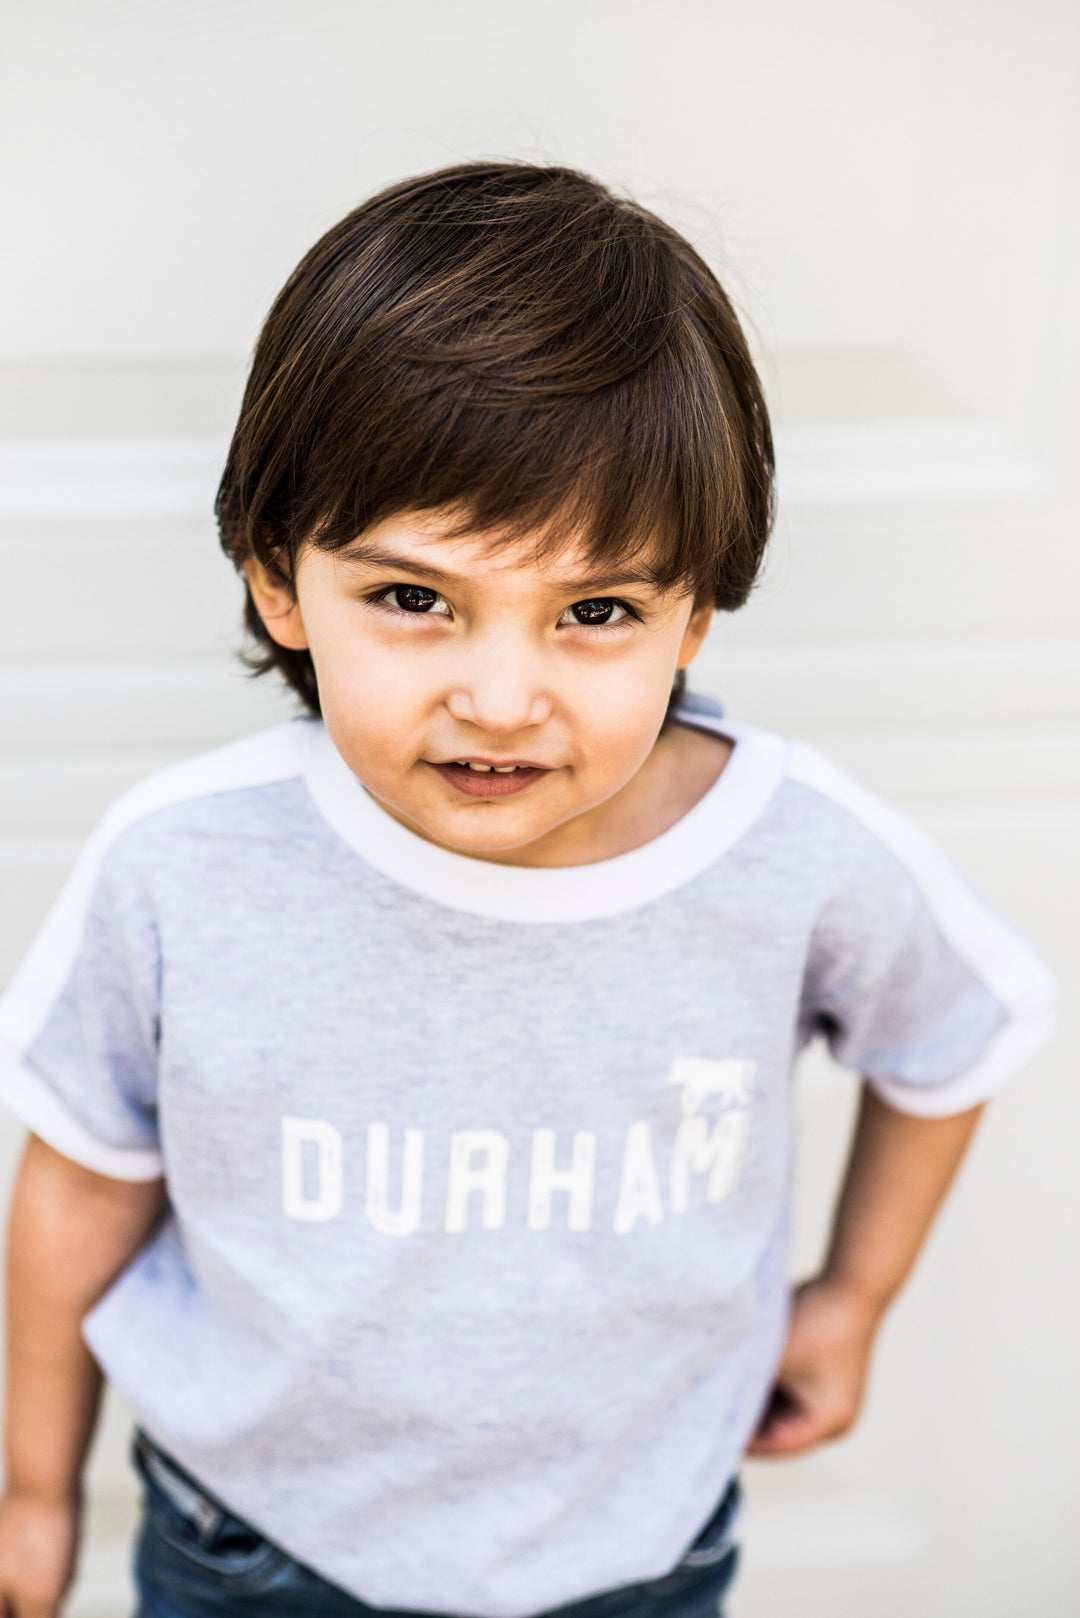 Durham with Bull Toddler T-Shirt #1